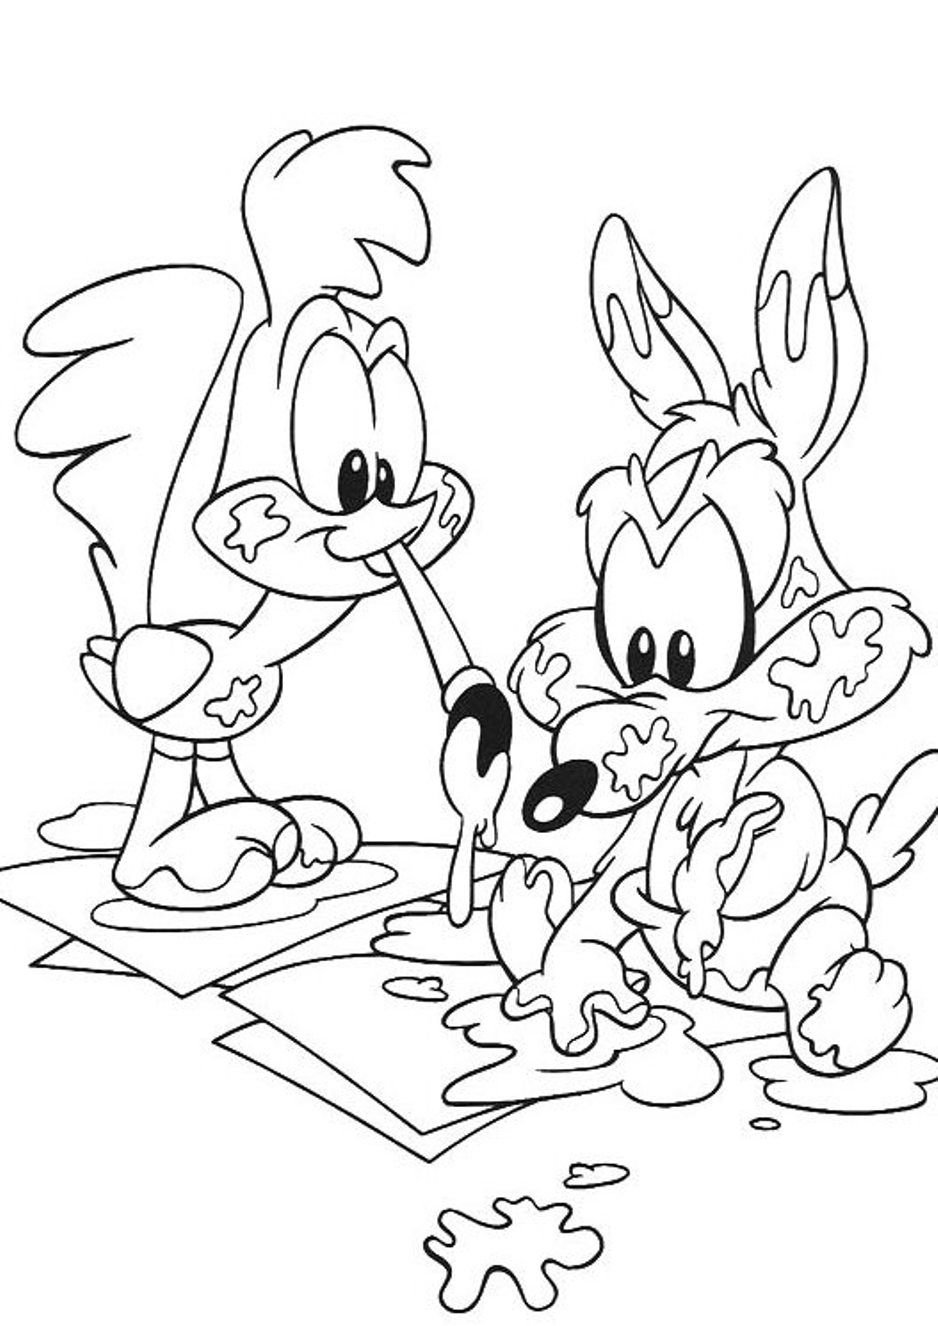 Free Printable Looney Tunes Coloring Page